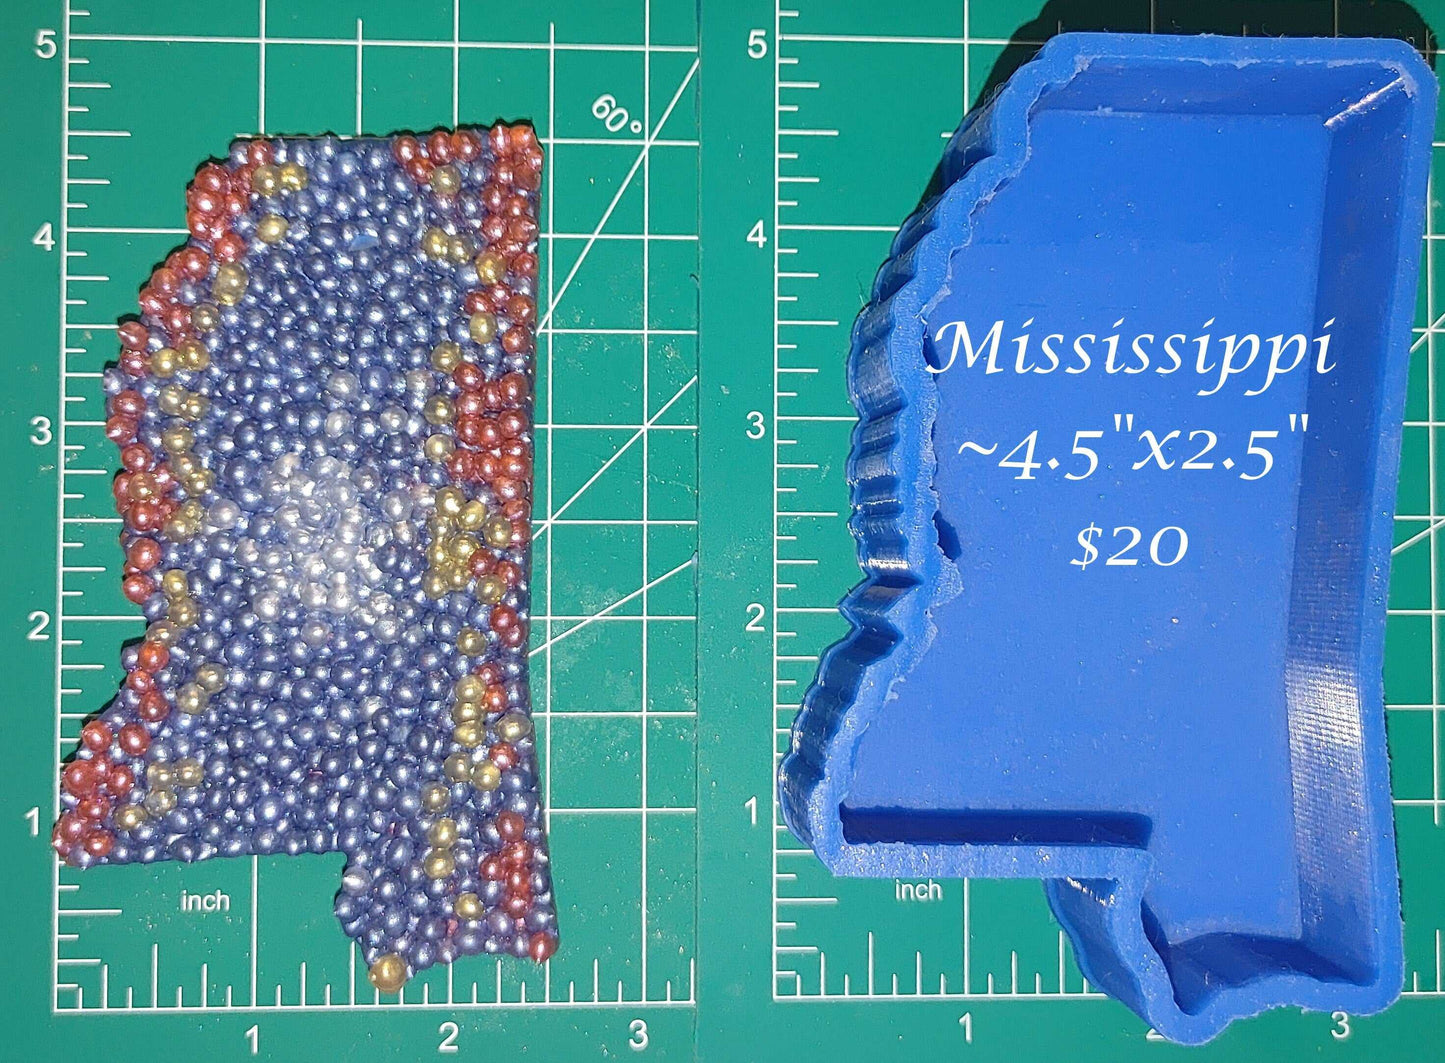 Mississippi - Silicone Freshie Mold - Silicone Mold